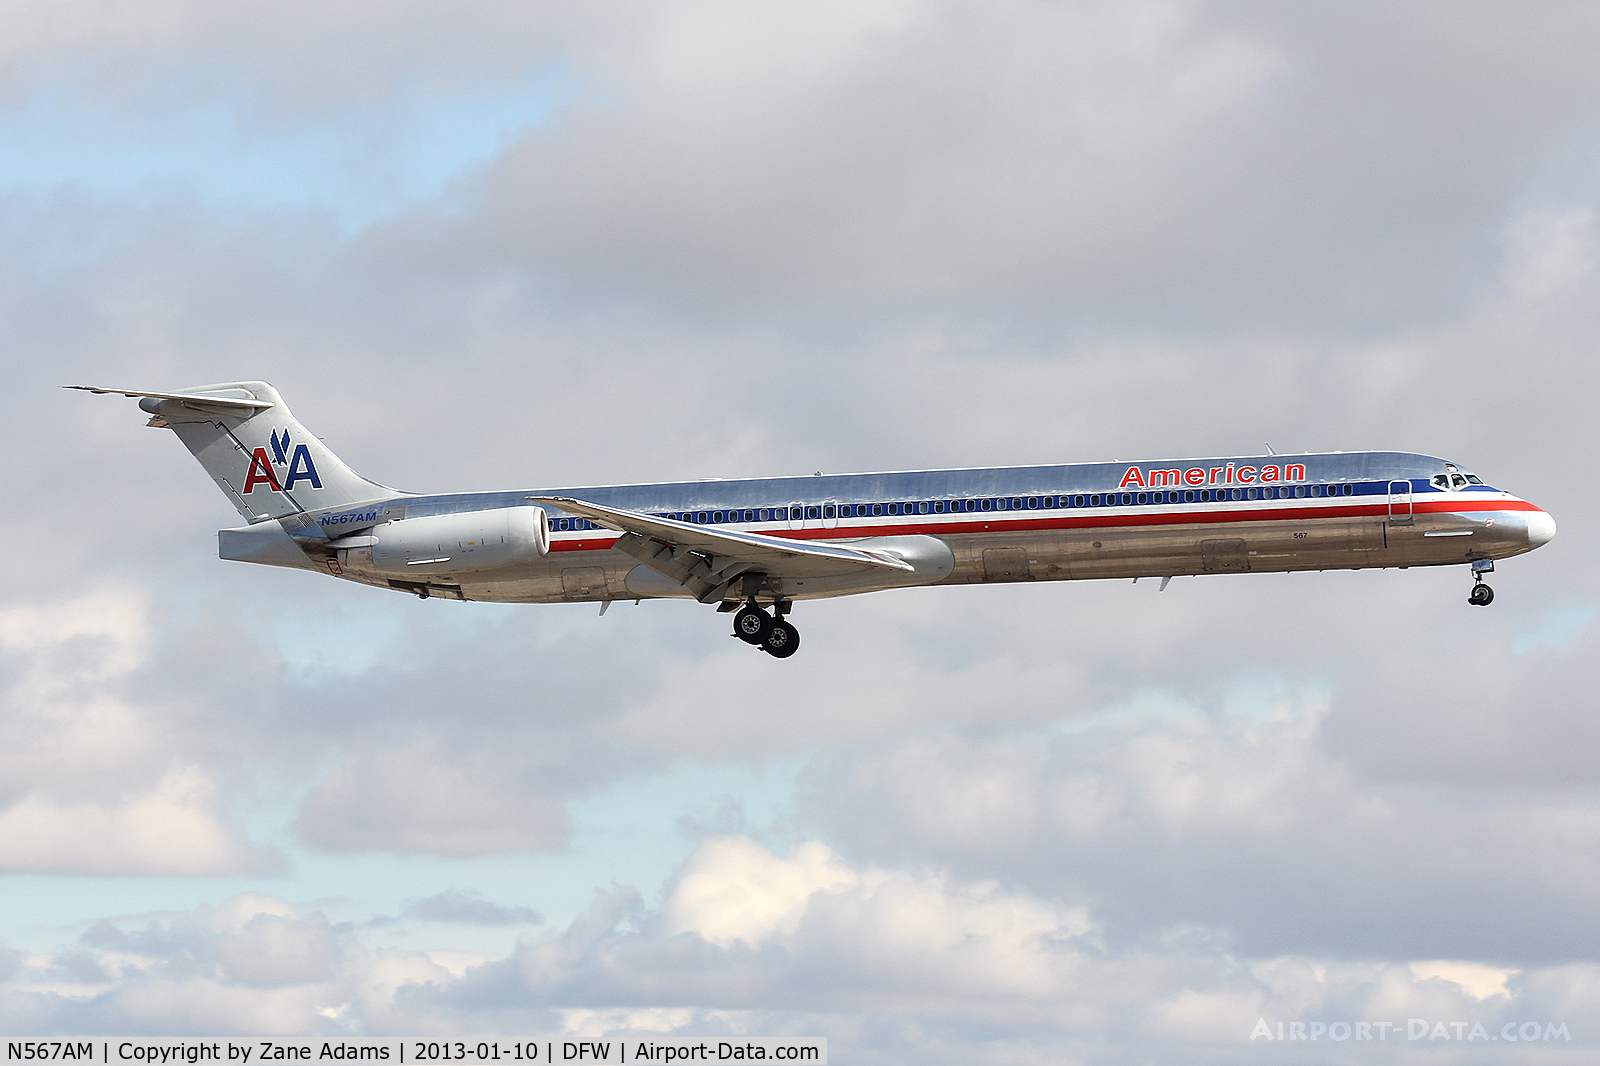 N567AM, 1992 McDonnell Douglas MD-83 (DC-9-83) C/N 53293, American Airlines landing at DFW Airport